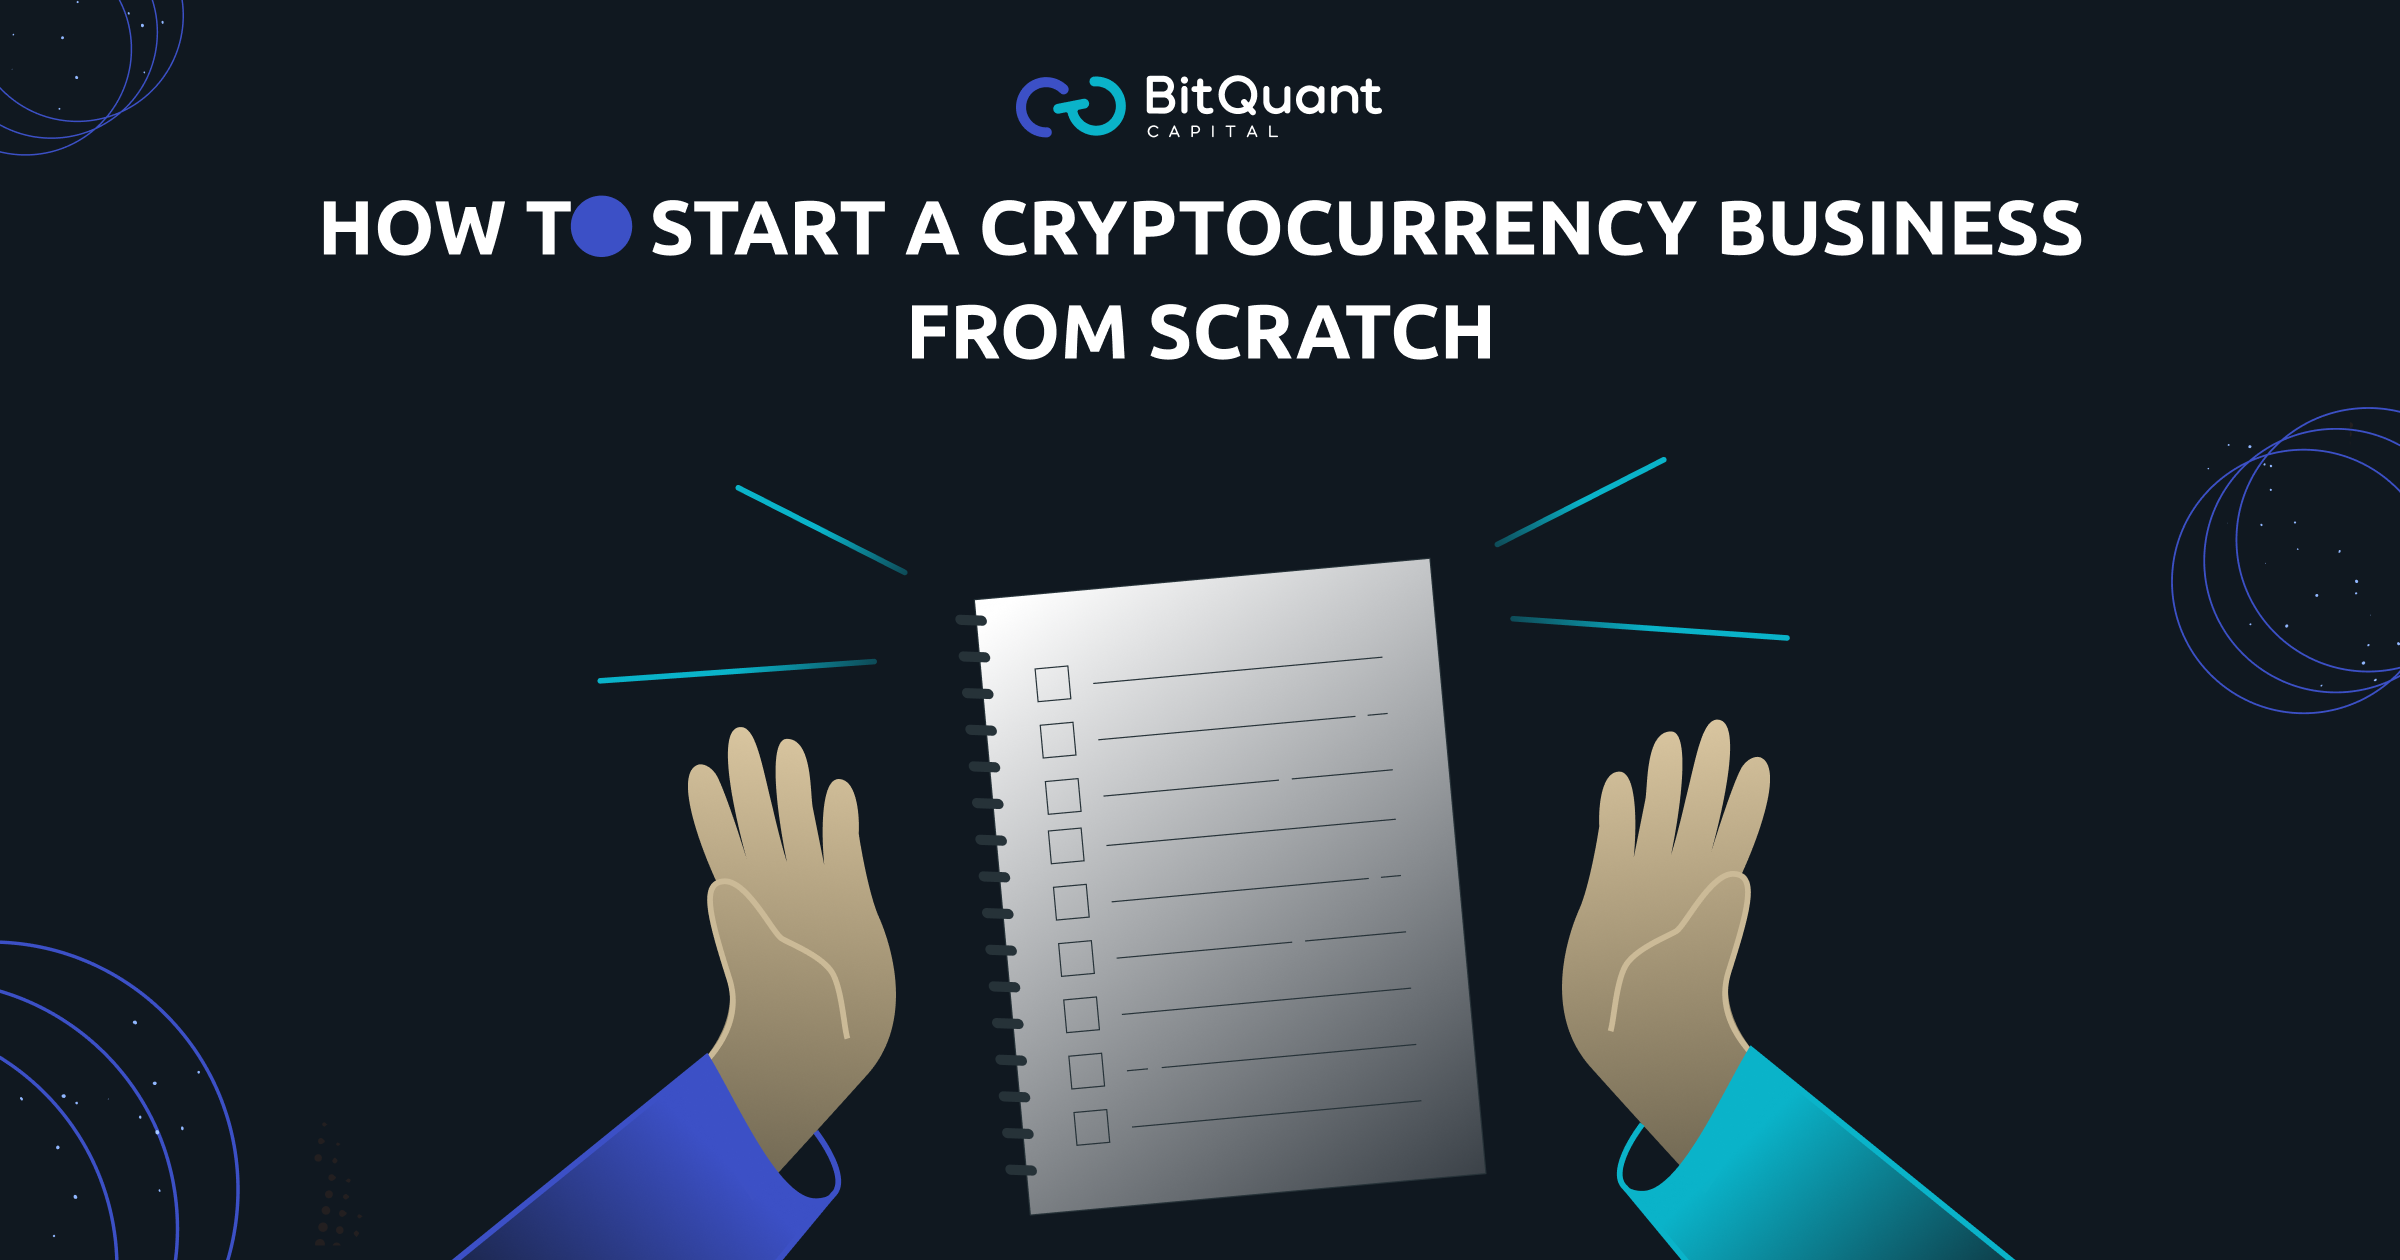 How to Start a Cryptocurrency Business From Scratch?